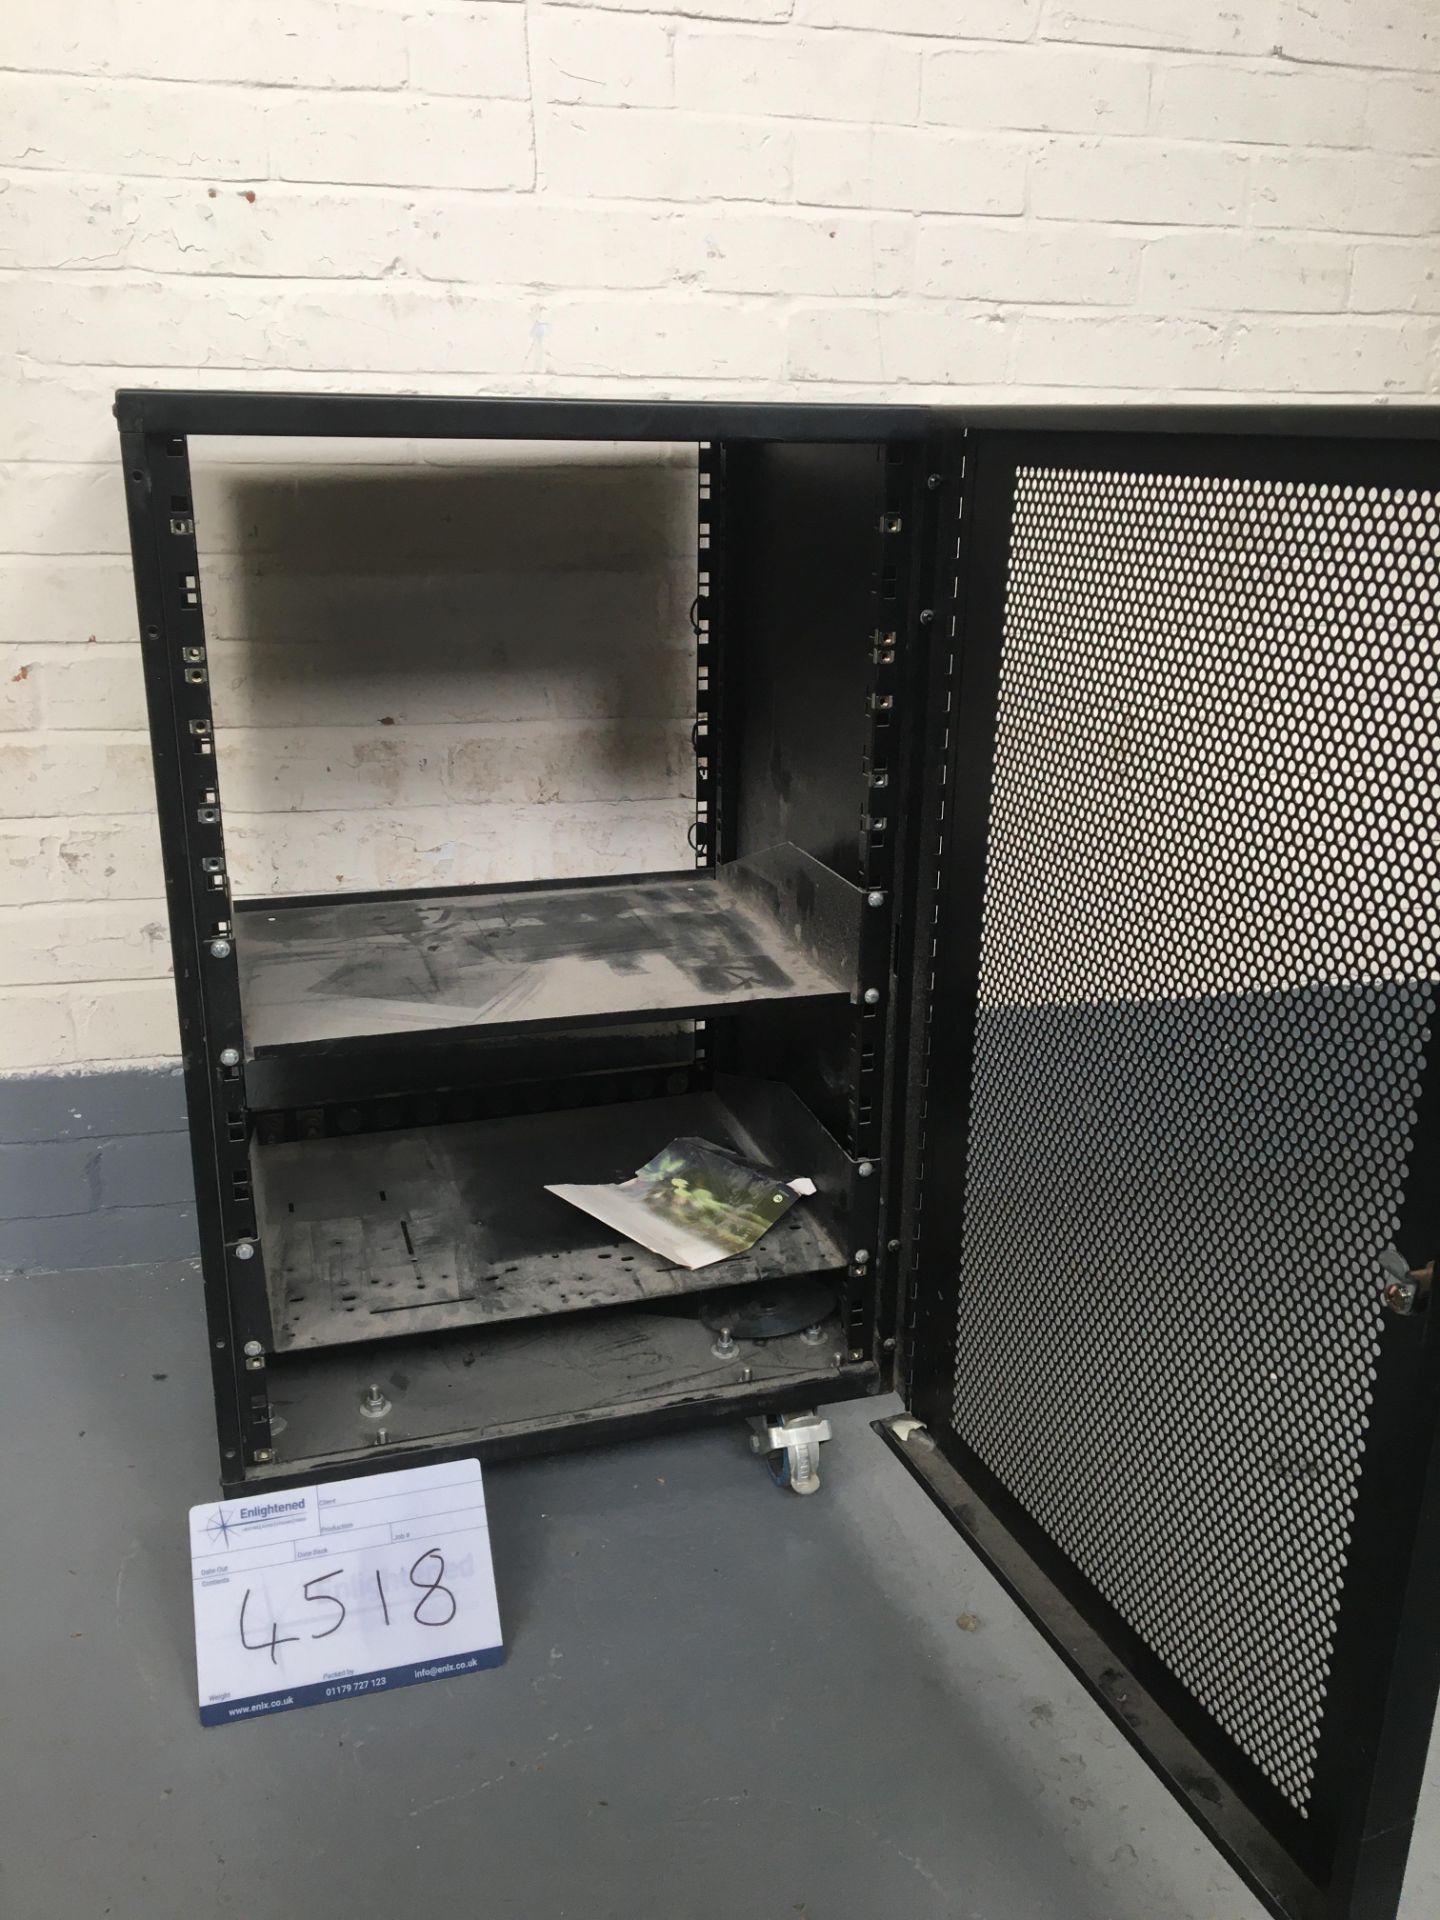 16U 19" Server AV Rack on wheels w/. shelves and /door. 480*520*765mm. Condition: Used Removed - Image 2 of 5